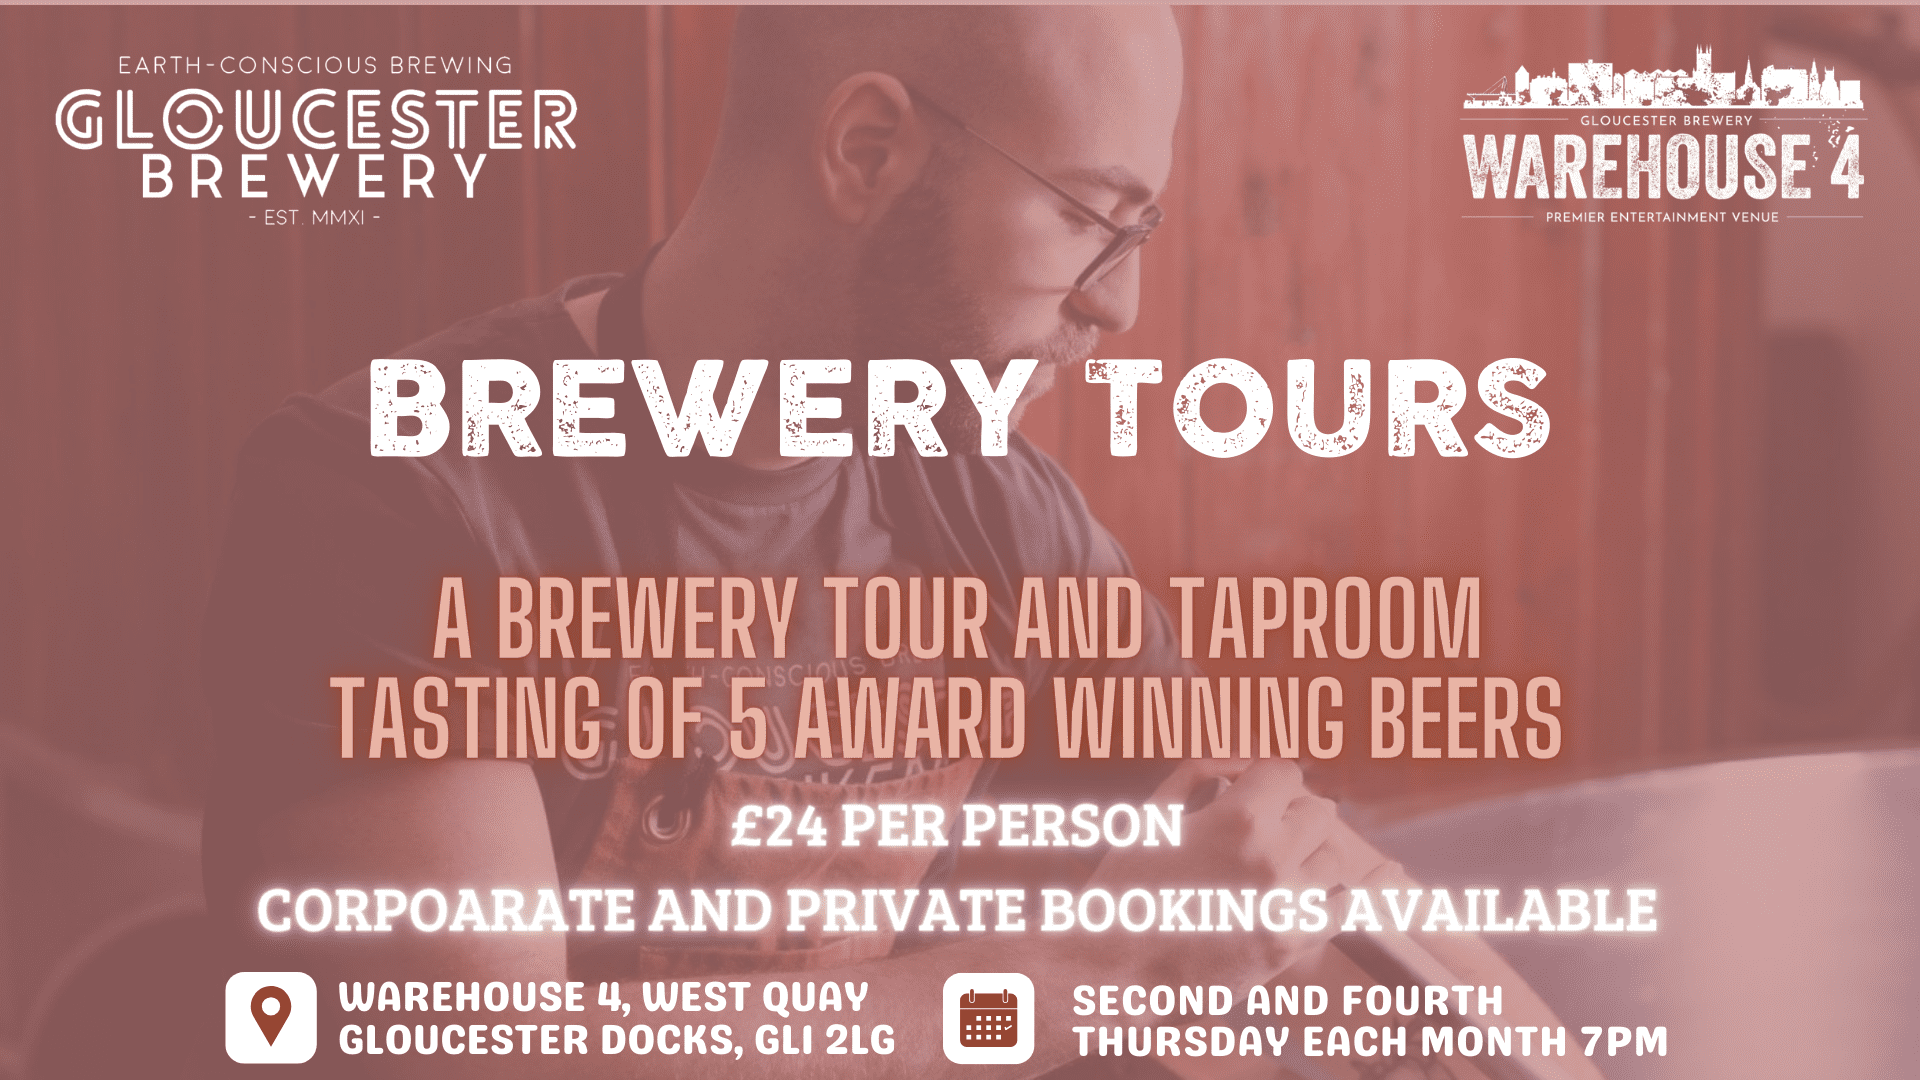 Gloucester Brewery tours and tasting